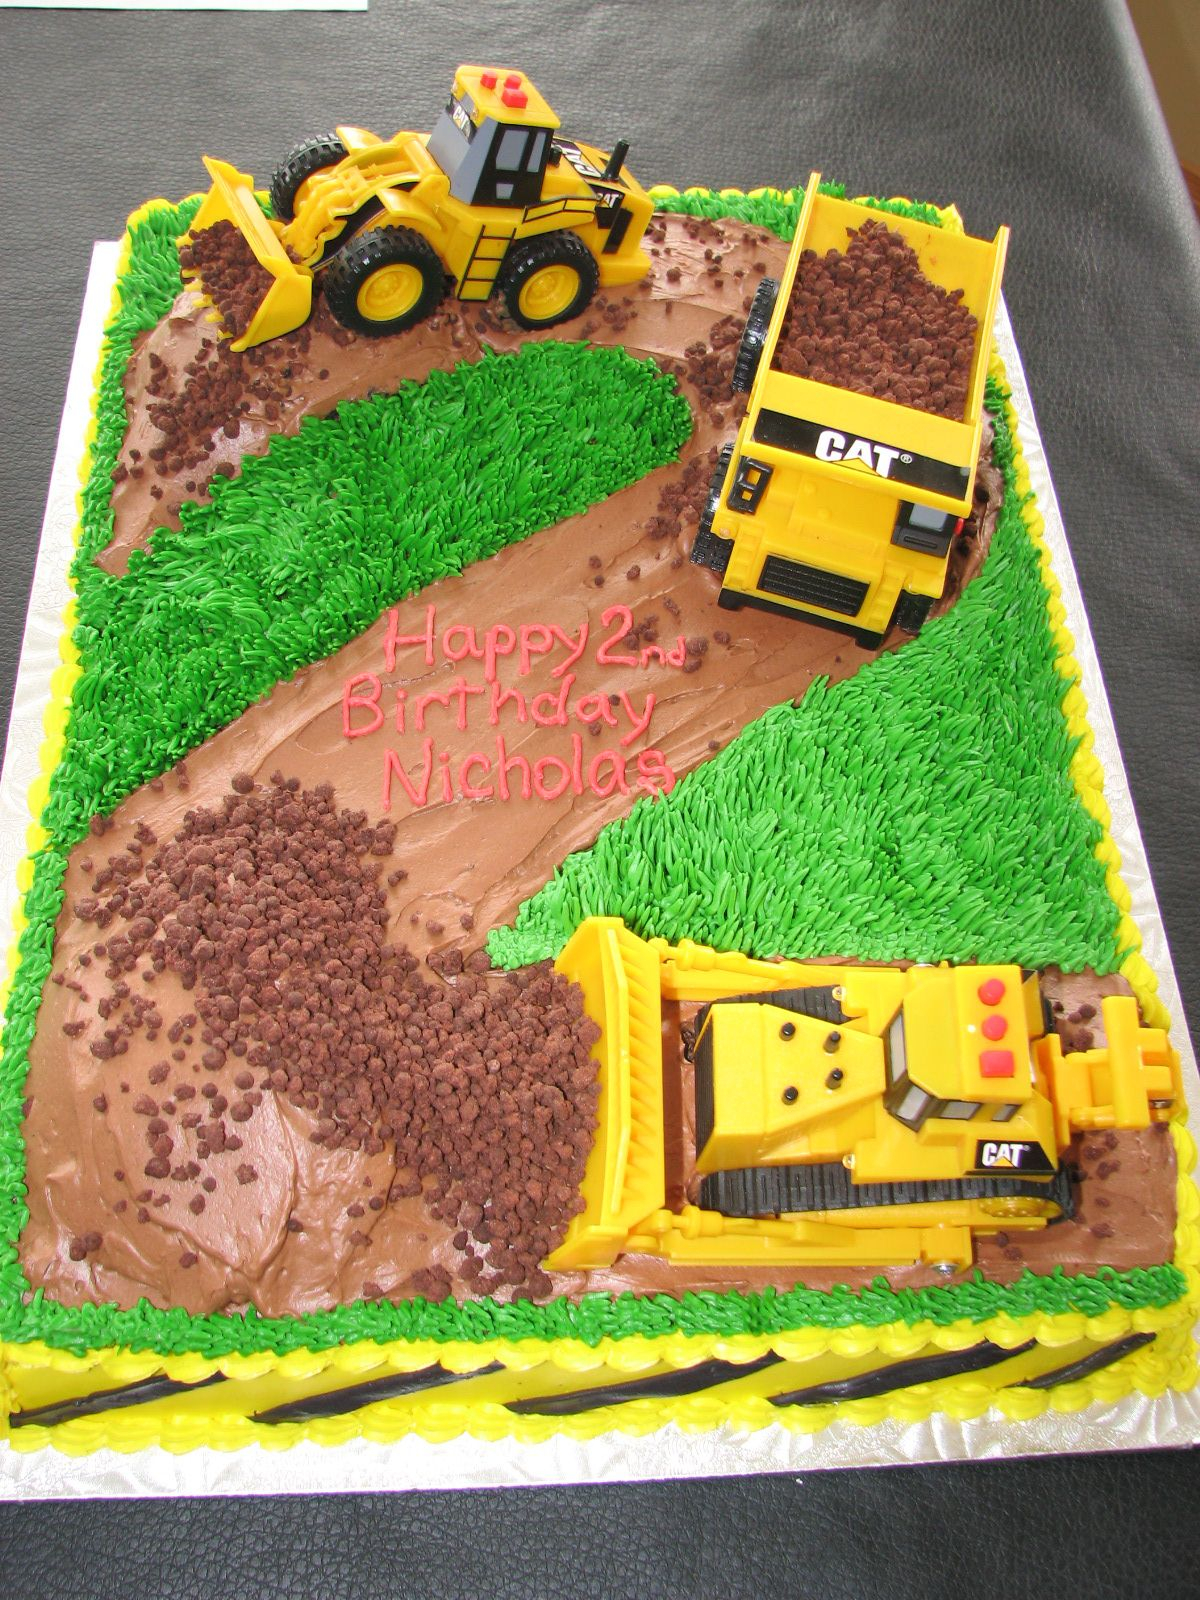 Birthday Cake Ideas For Boys Cute Idea For A John Deere Party Too Just Need Some Green Tractors